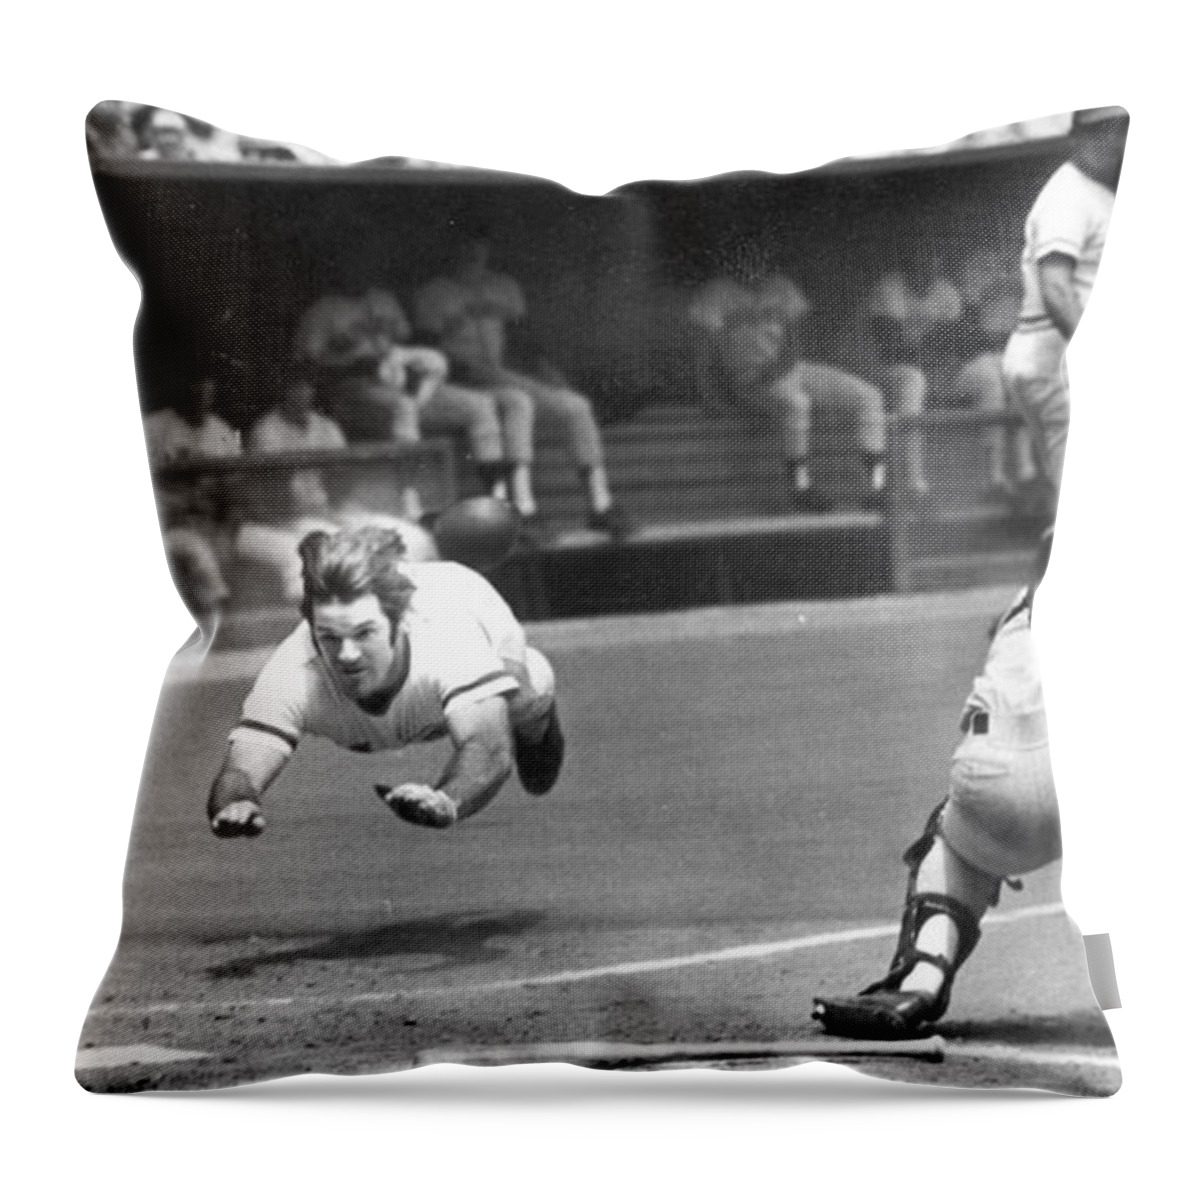 Pete Throw Pillow featuring the photograph Pete Rose by Action